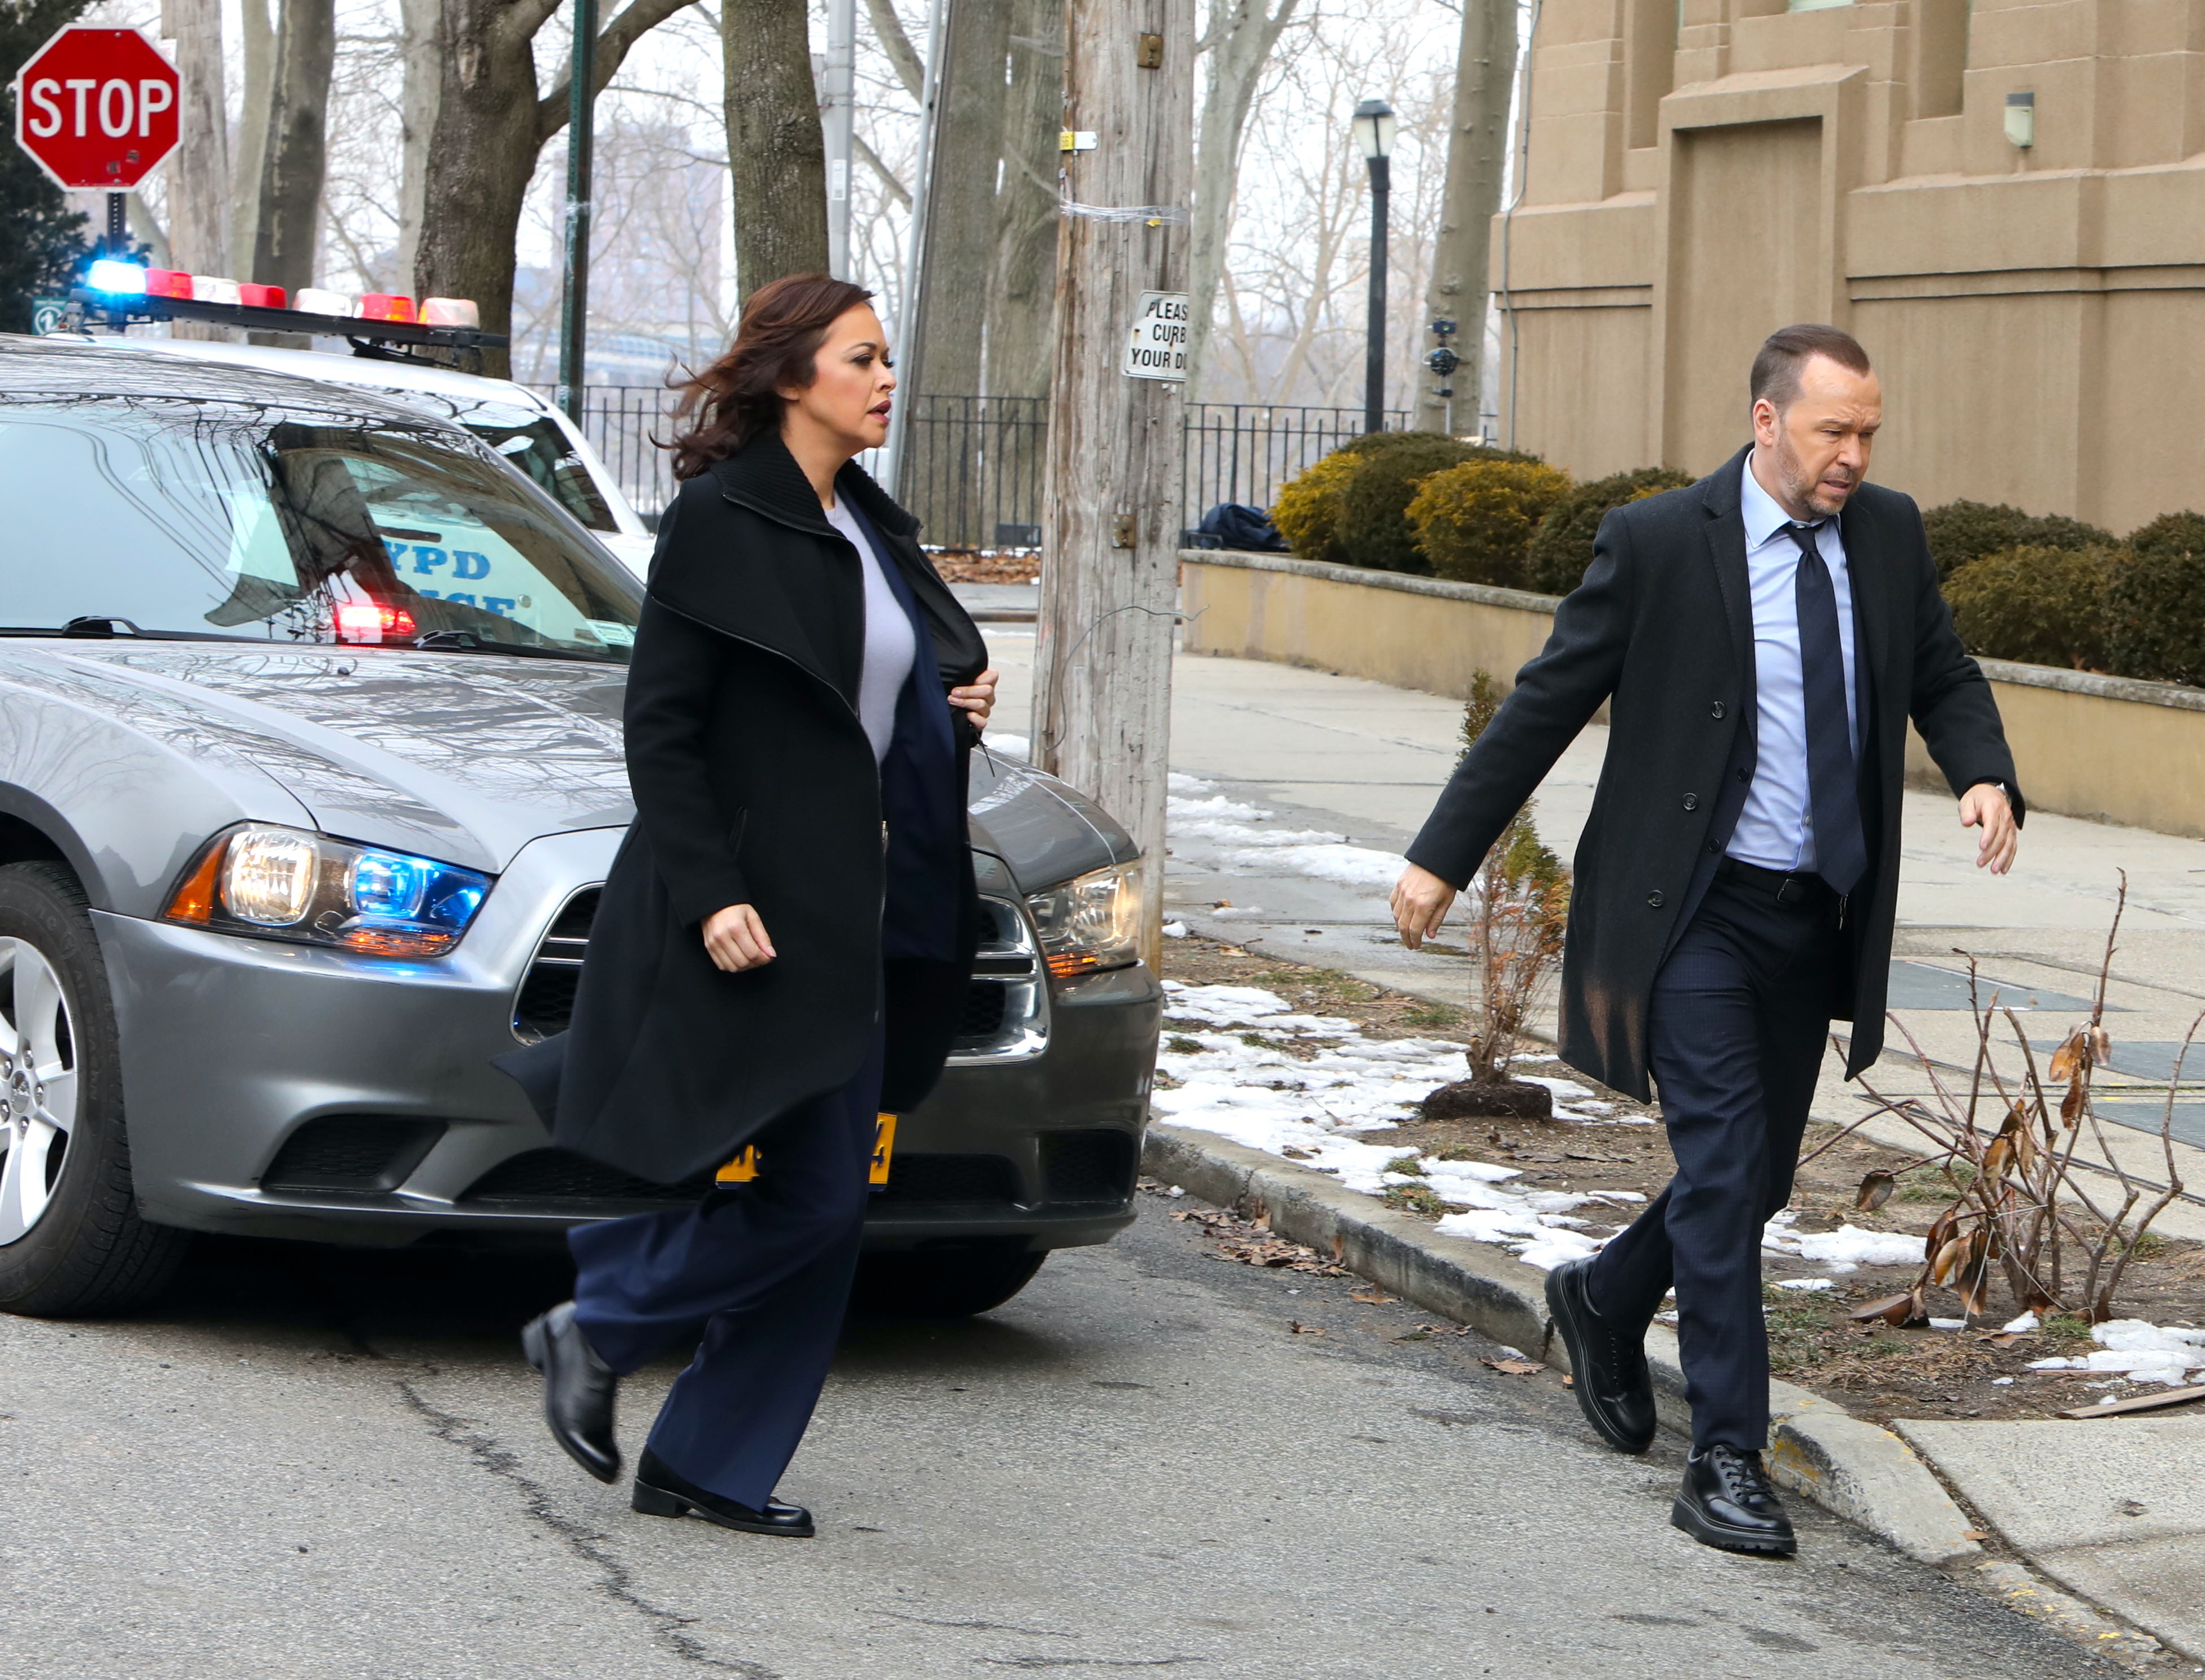 Marisa Ramirez and Donnie Wahlberg on the set of Blue Bloods | Jose Perez/Bauer-Griffin/GC Images